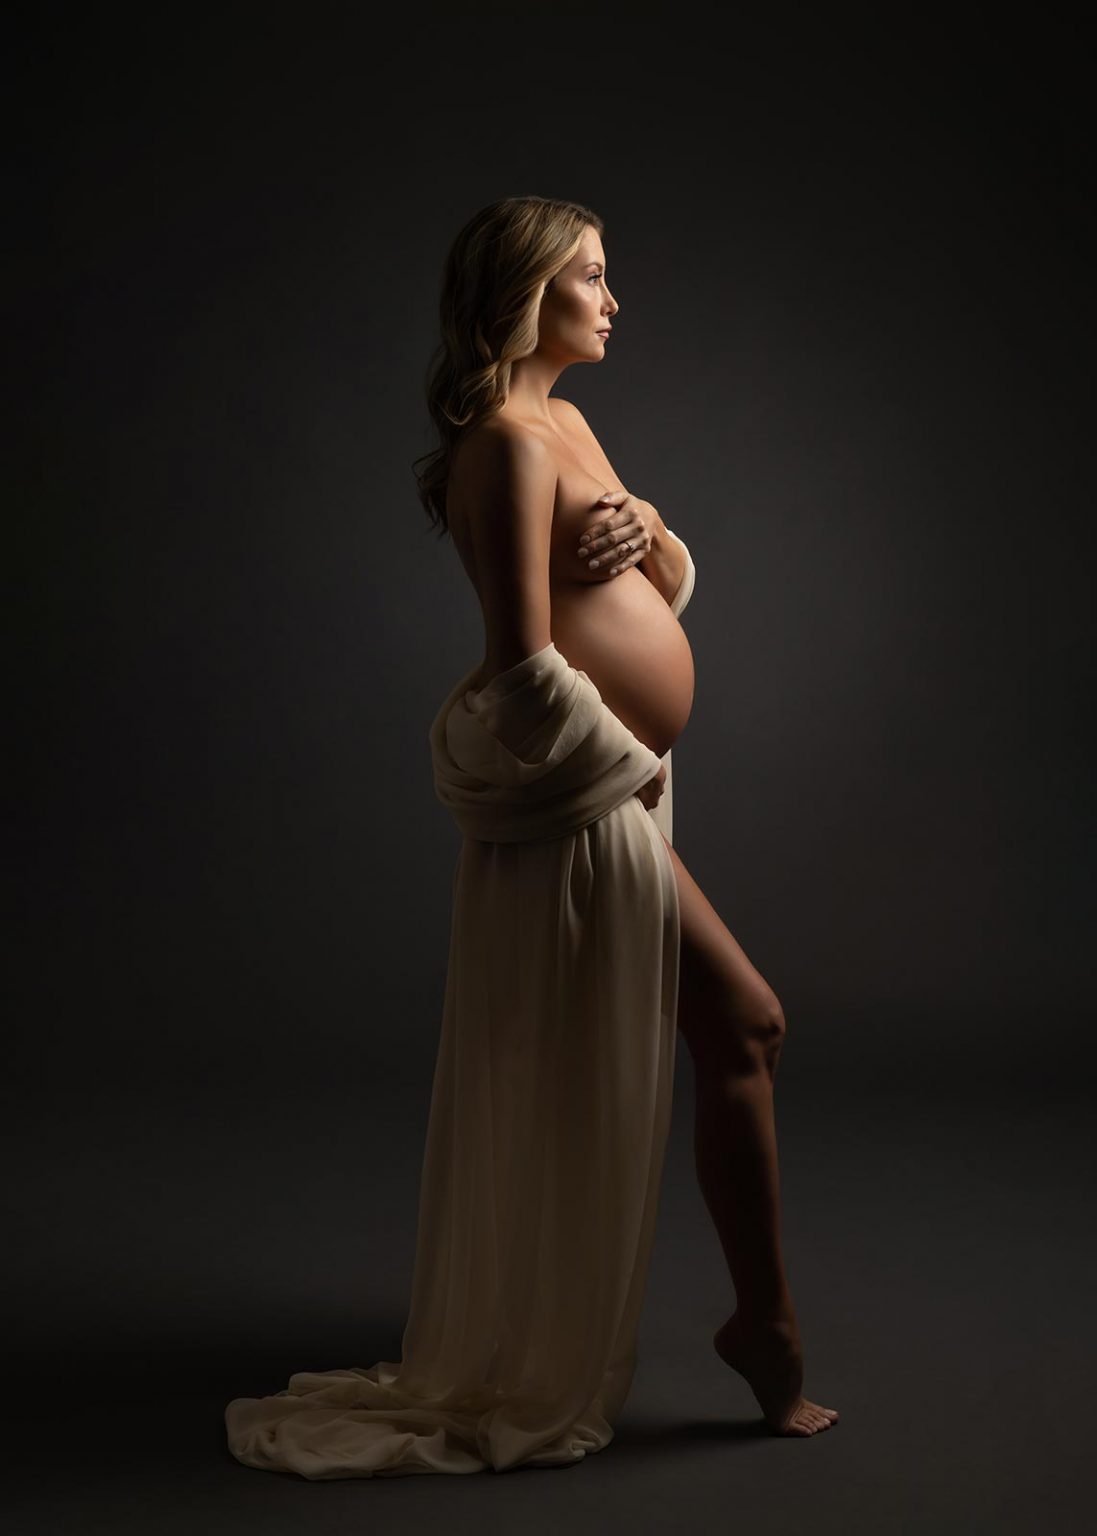 Intimate portrait of pregnant woman with draped silk